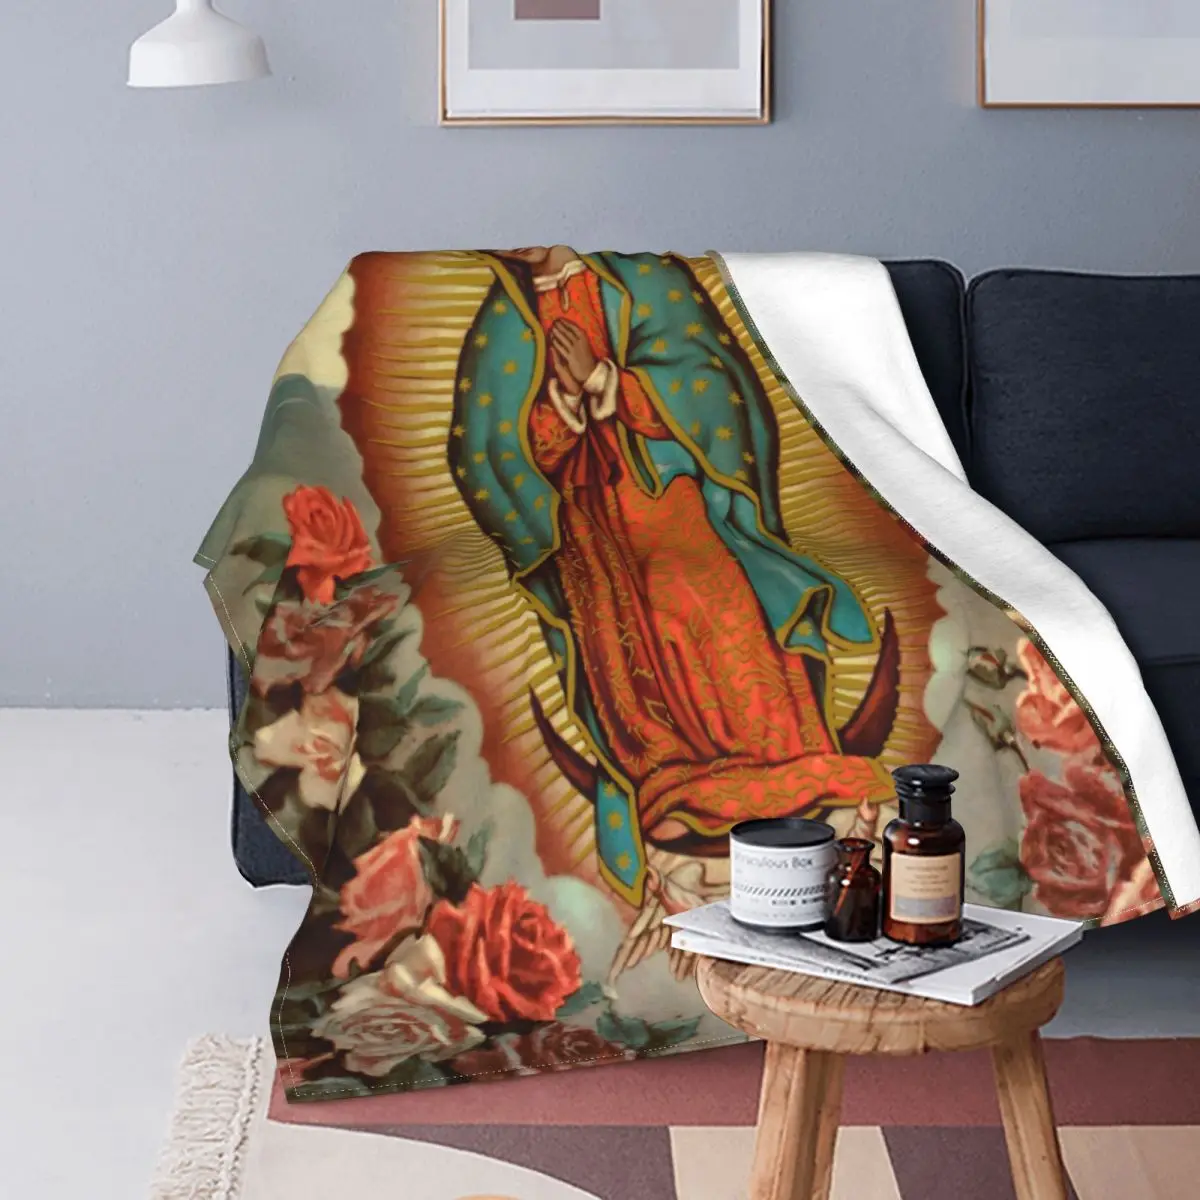 

Our Lady Of Guadalupe Mexican Virgin Mary Blanket Christian Catholic Flannel Vintage Throw Blanket for Chair Covering Sofa